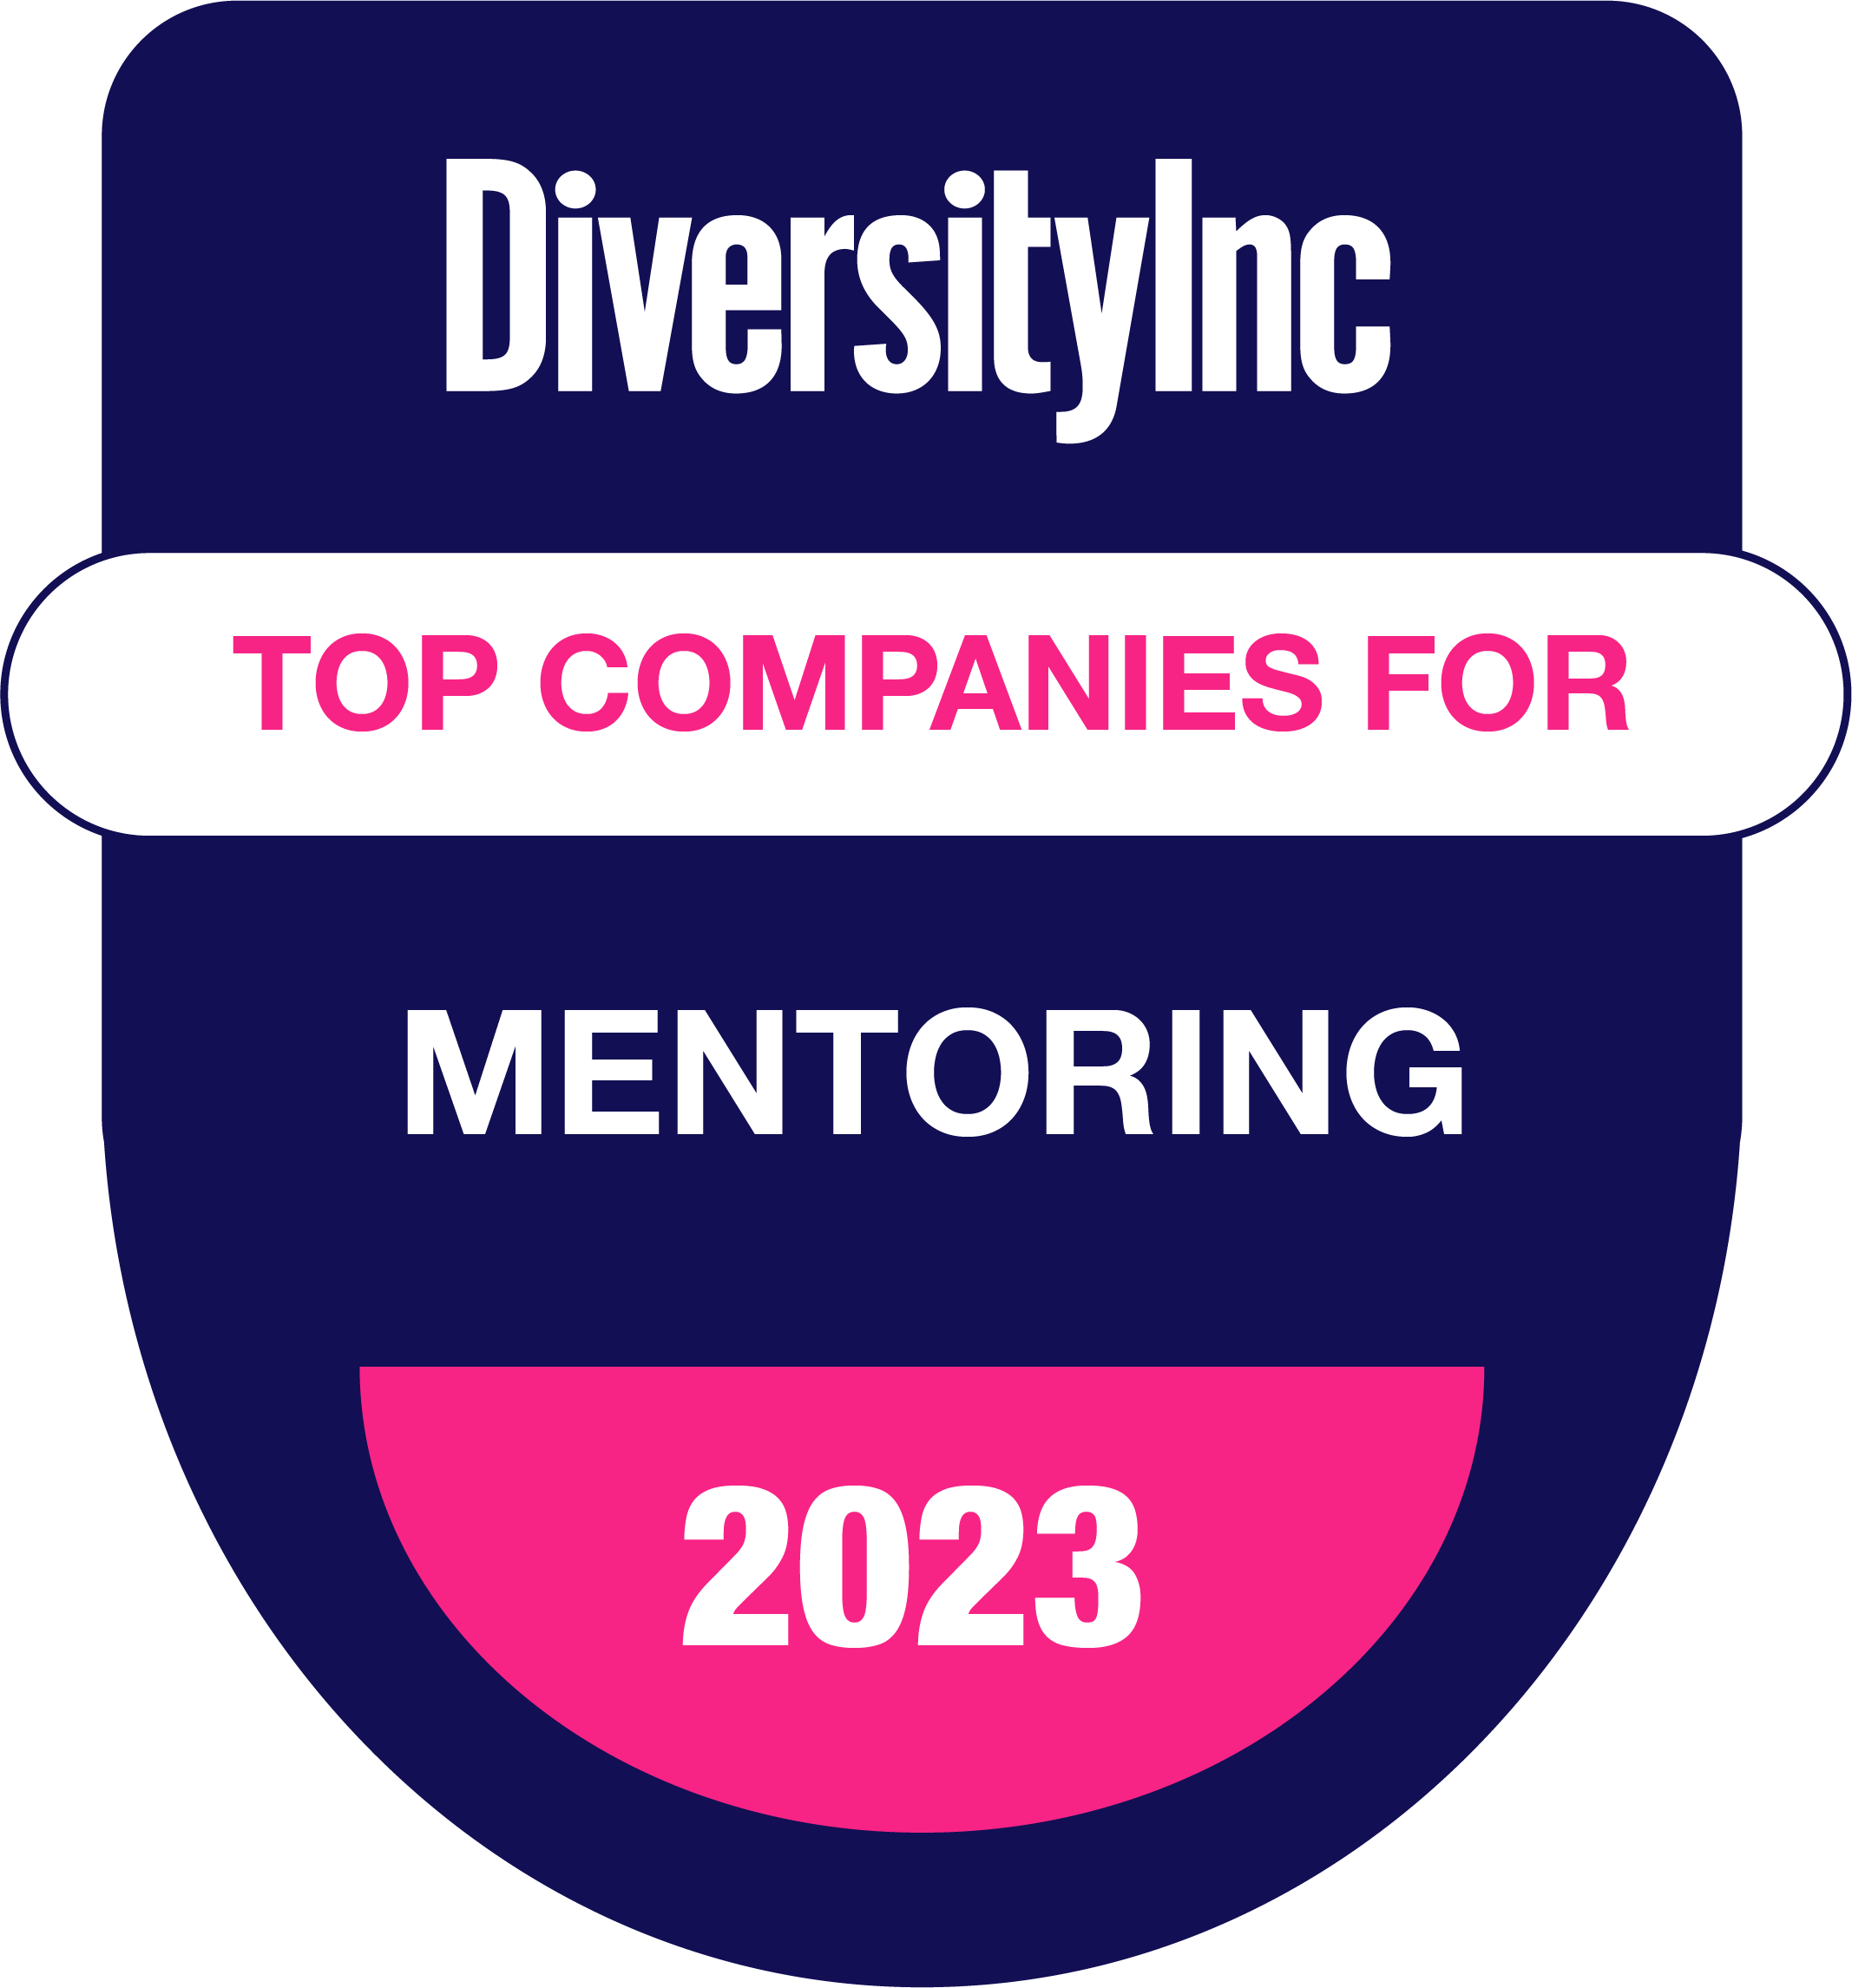 2023 Top Companies for Mentoring